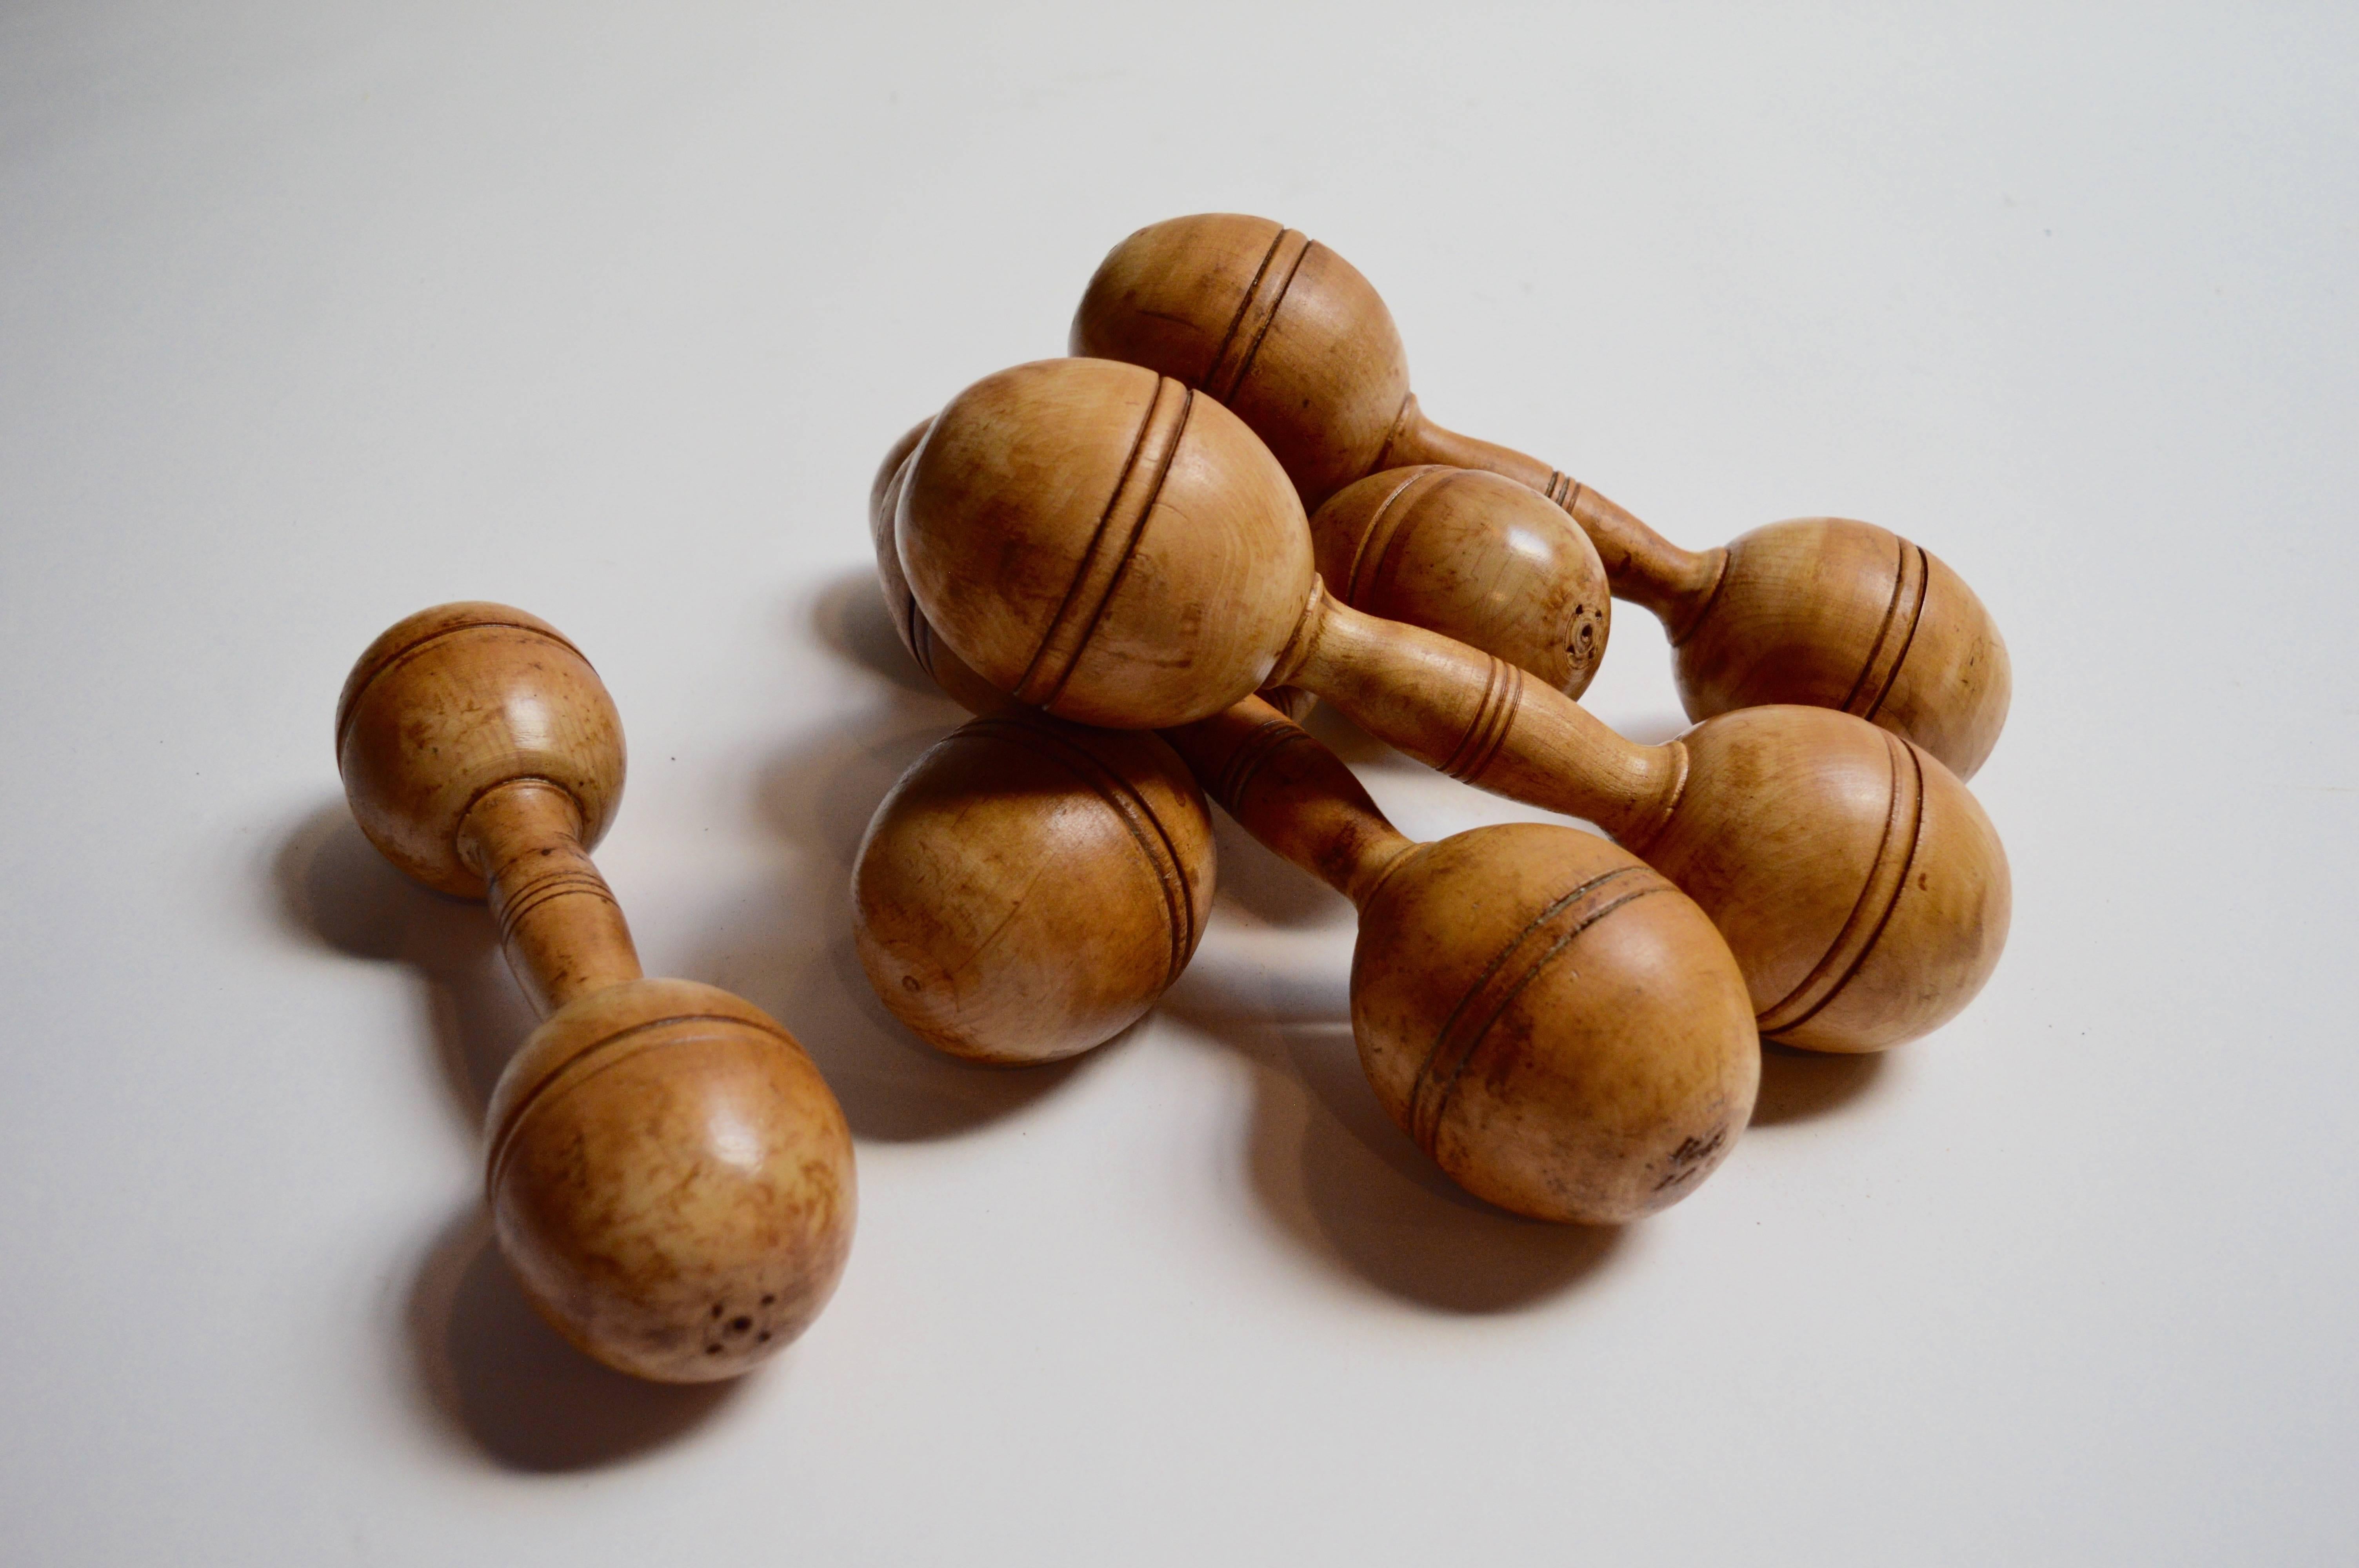 Great set of six vintage wooden dumbbells. Four larger 1.5 pound dumbbells and two smaller one pound dumbbells. Great decorative object for a coffee table or home gym. Excellent vintage condition.